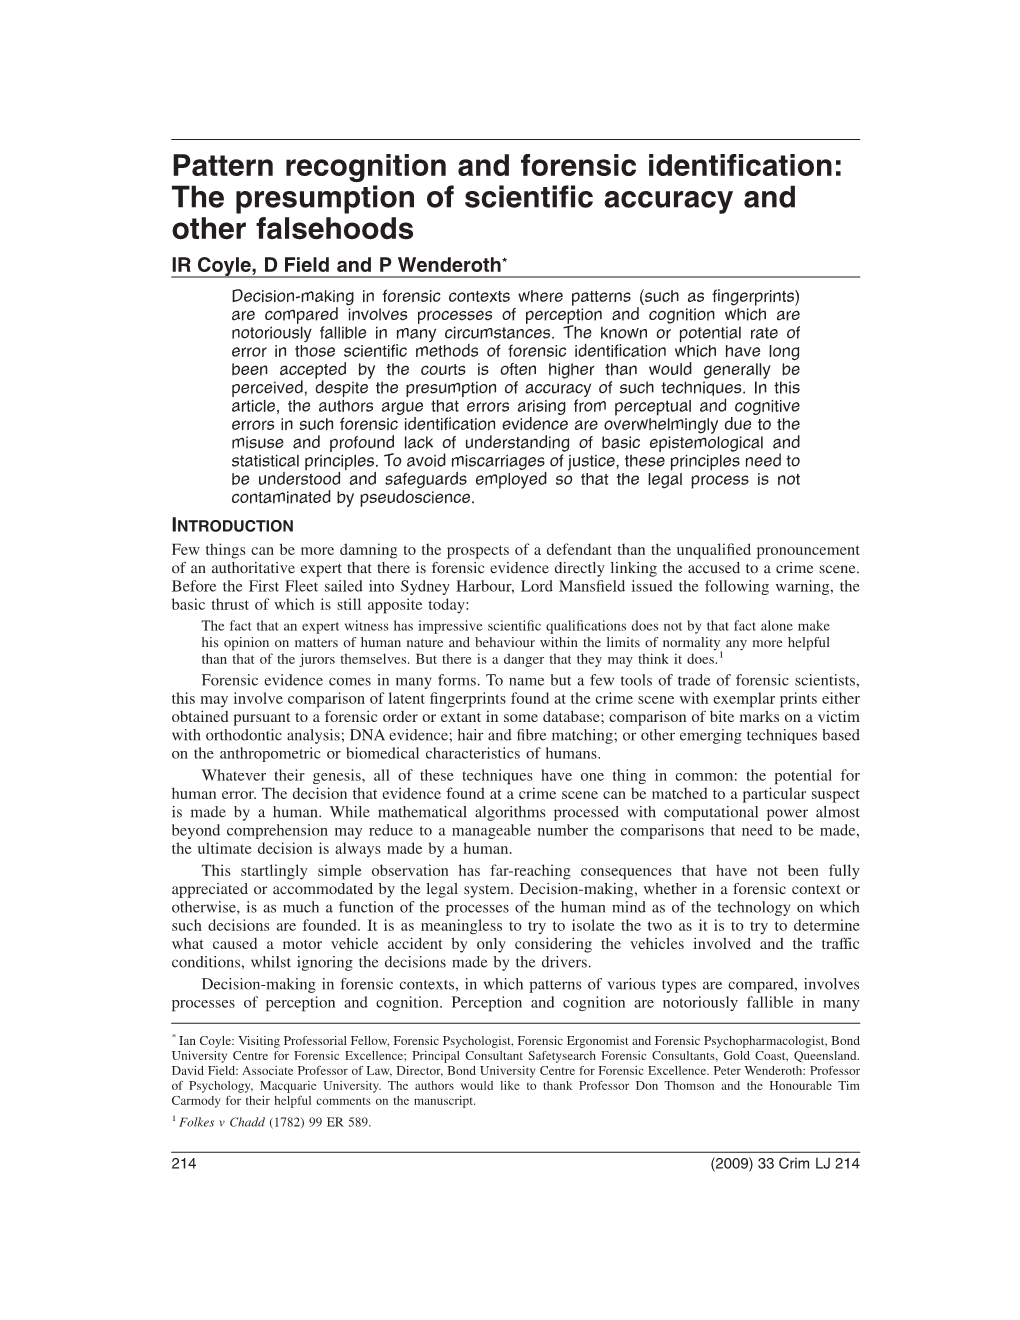 Pattern Recognition and Forensic Identification: the Presumption of Scientific Accuracy and Other Falsehoods